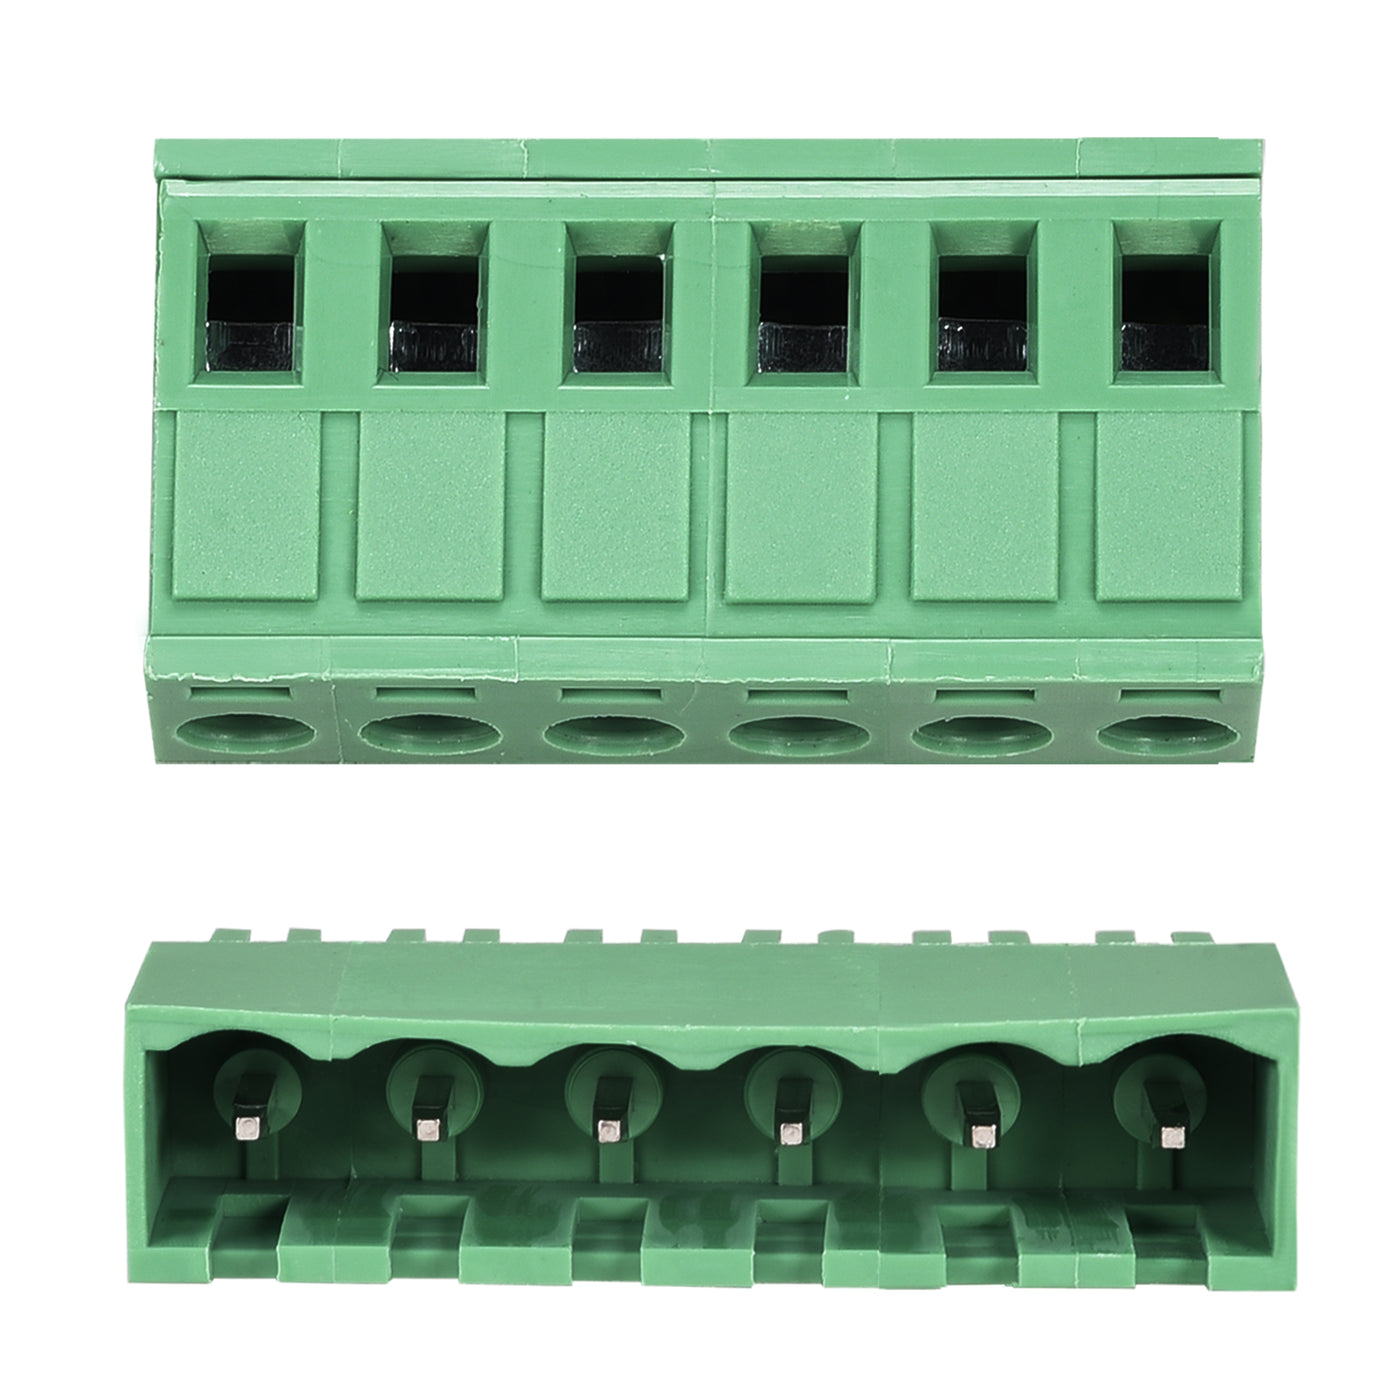 uxcell Uxcell 6 Pin 5.08mm Pitch Male Female PCB Screw Terminal Block 5 Sets